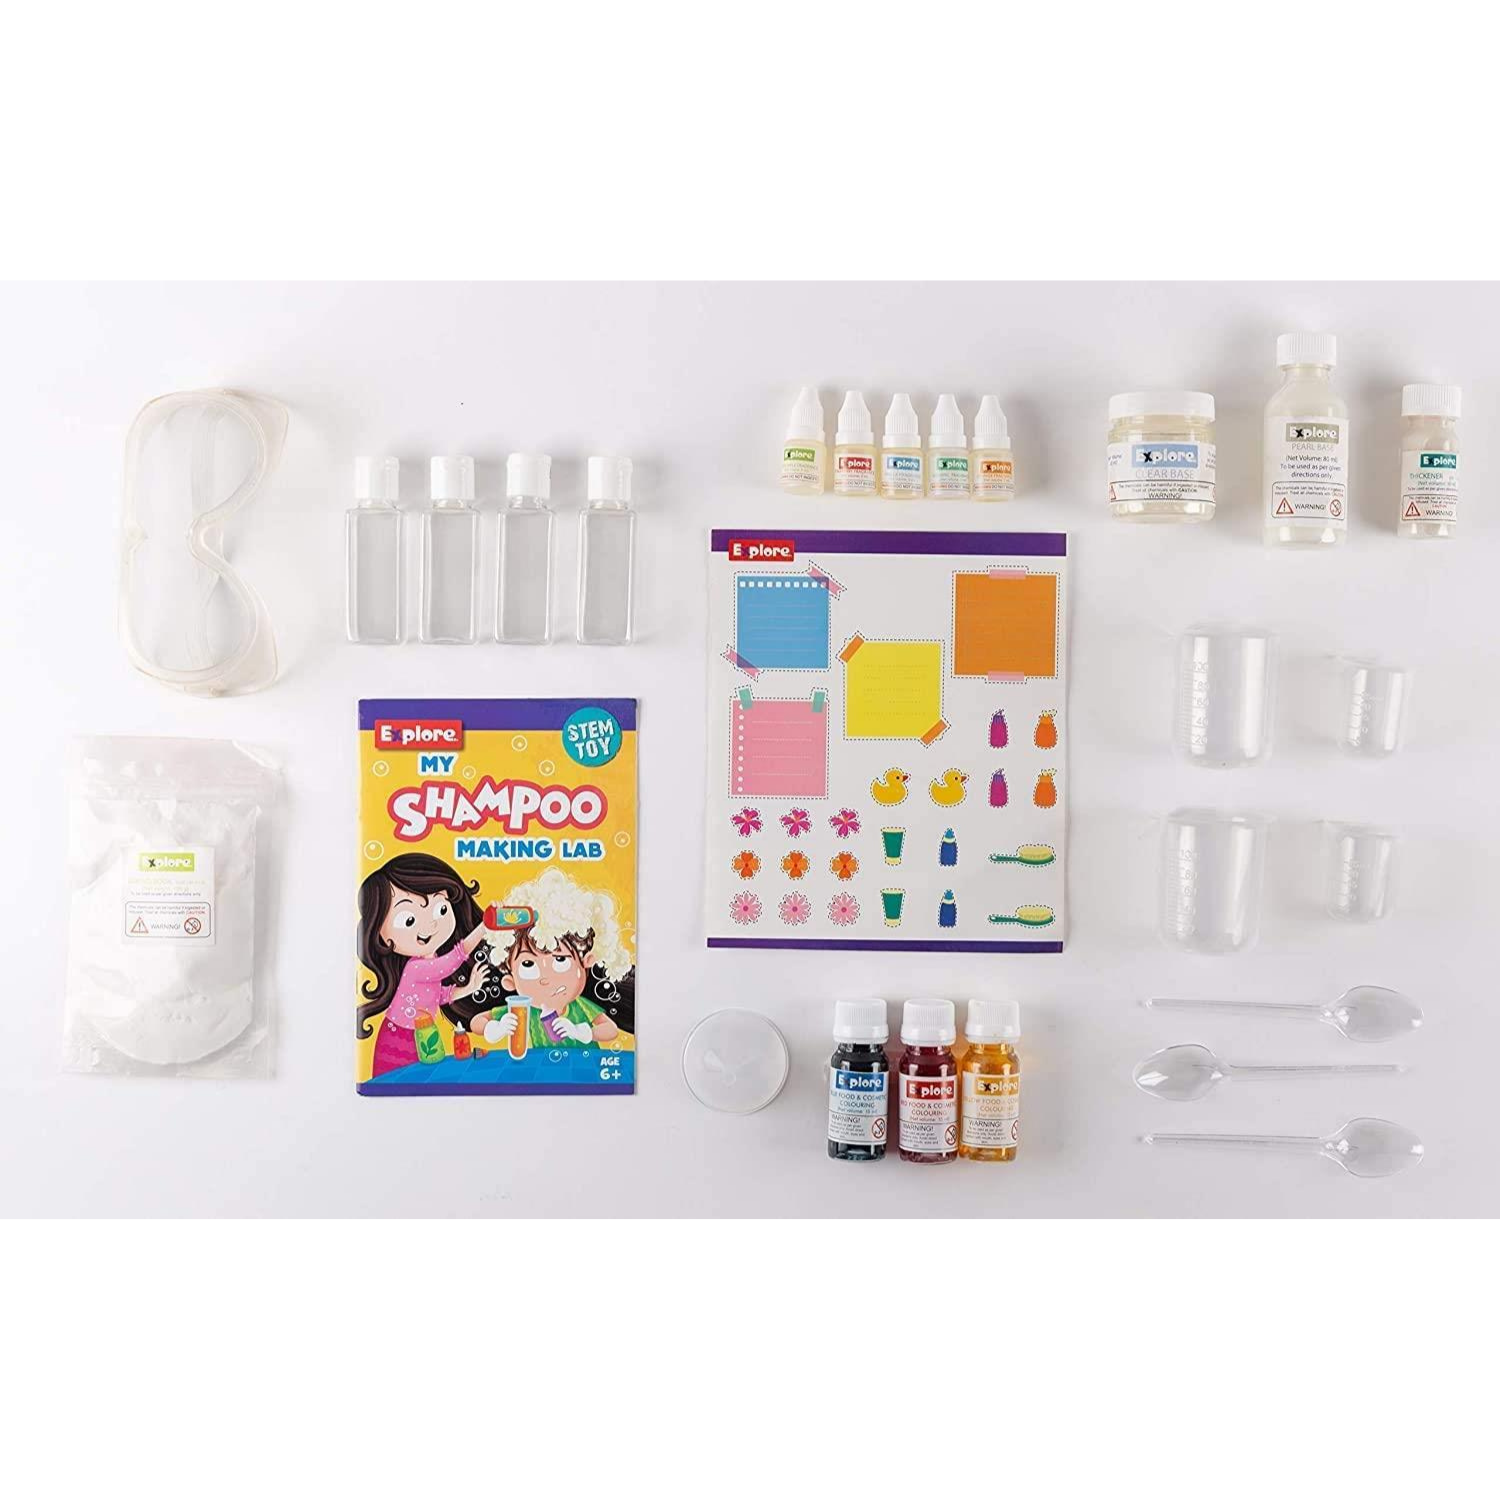 Mighty Mojo STEM Learner My Vanilla Candle Making Lab DYI Kids Science Kit,  1 unit - Foods Co.